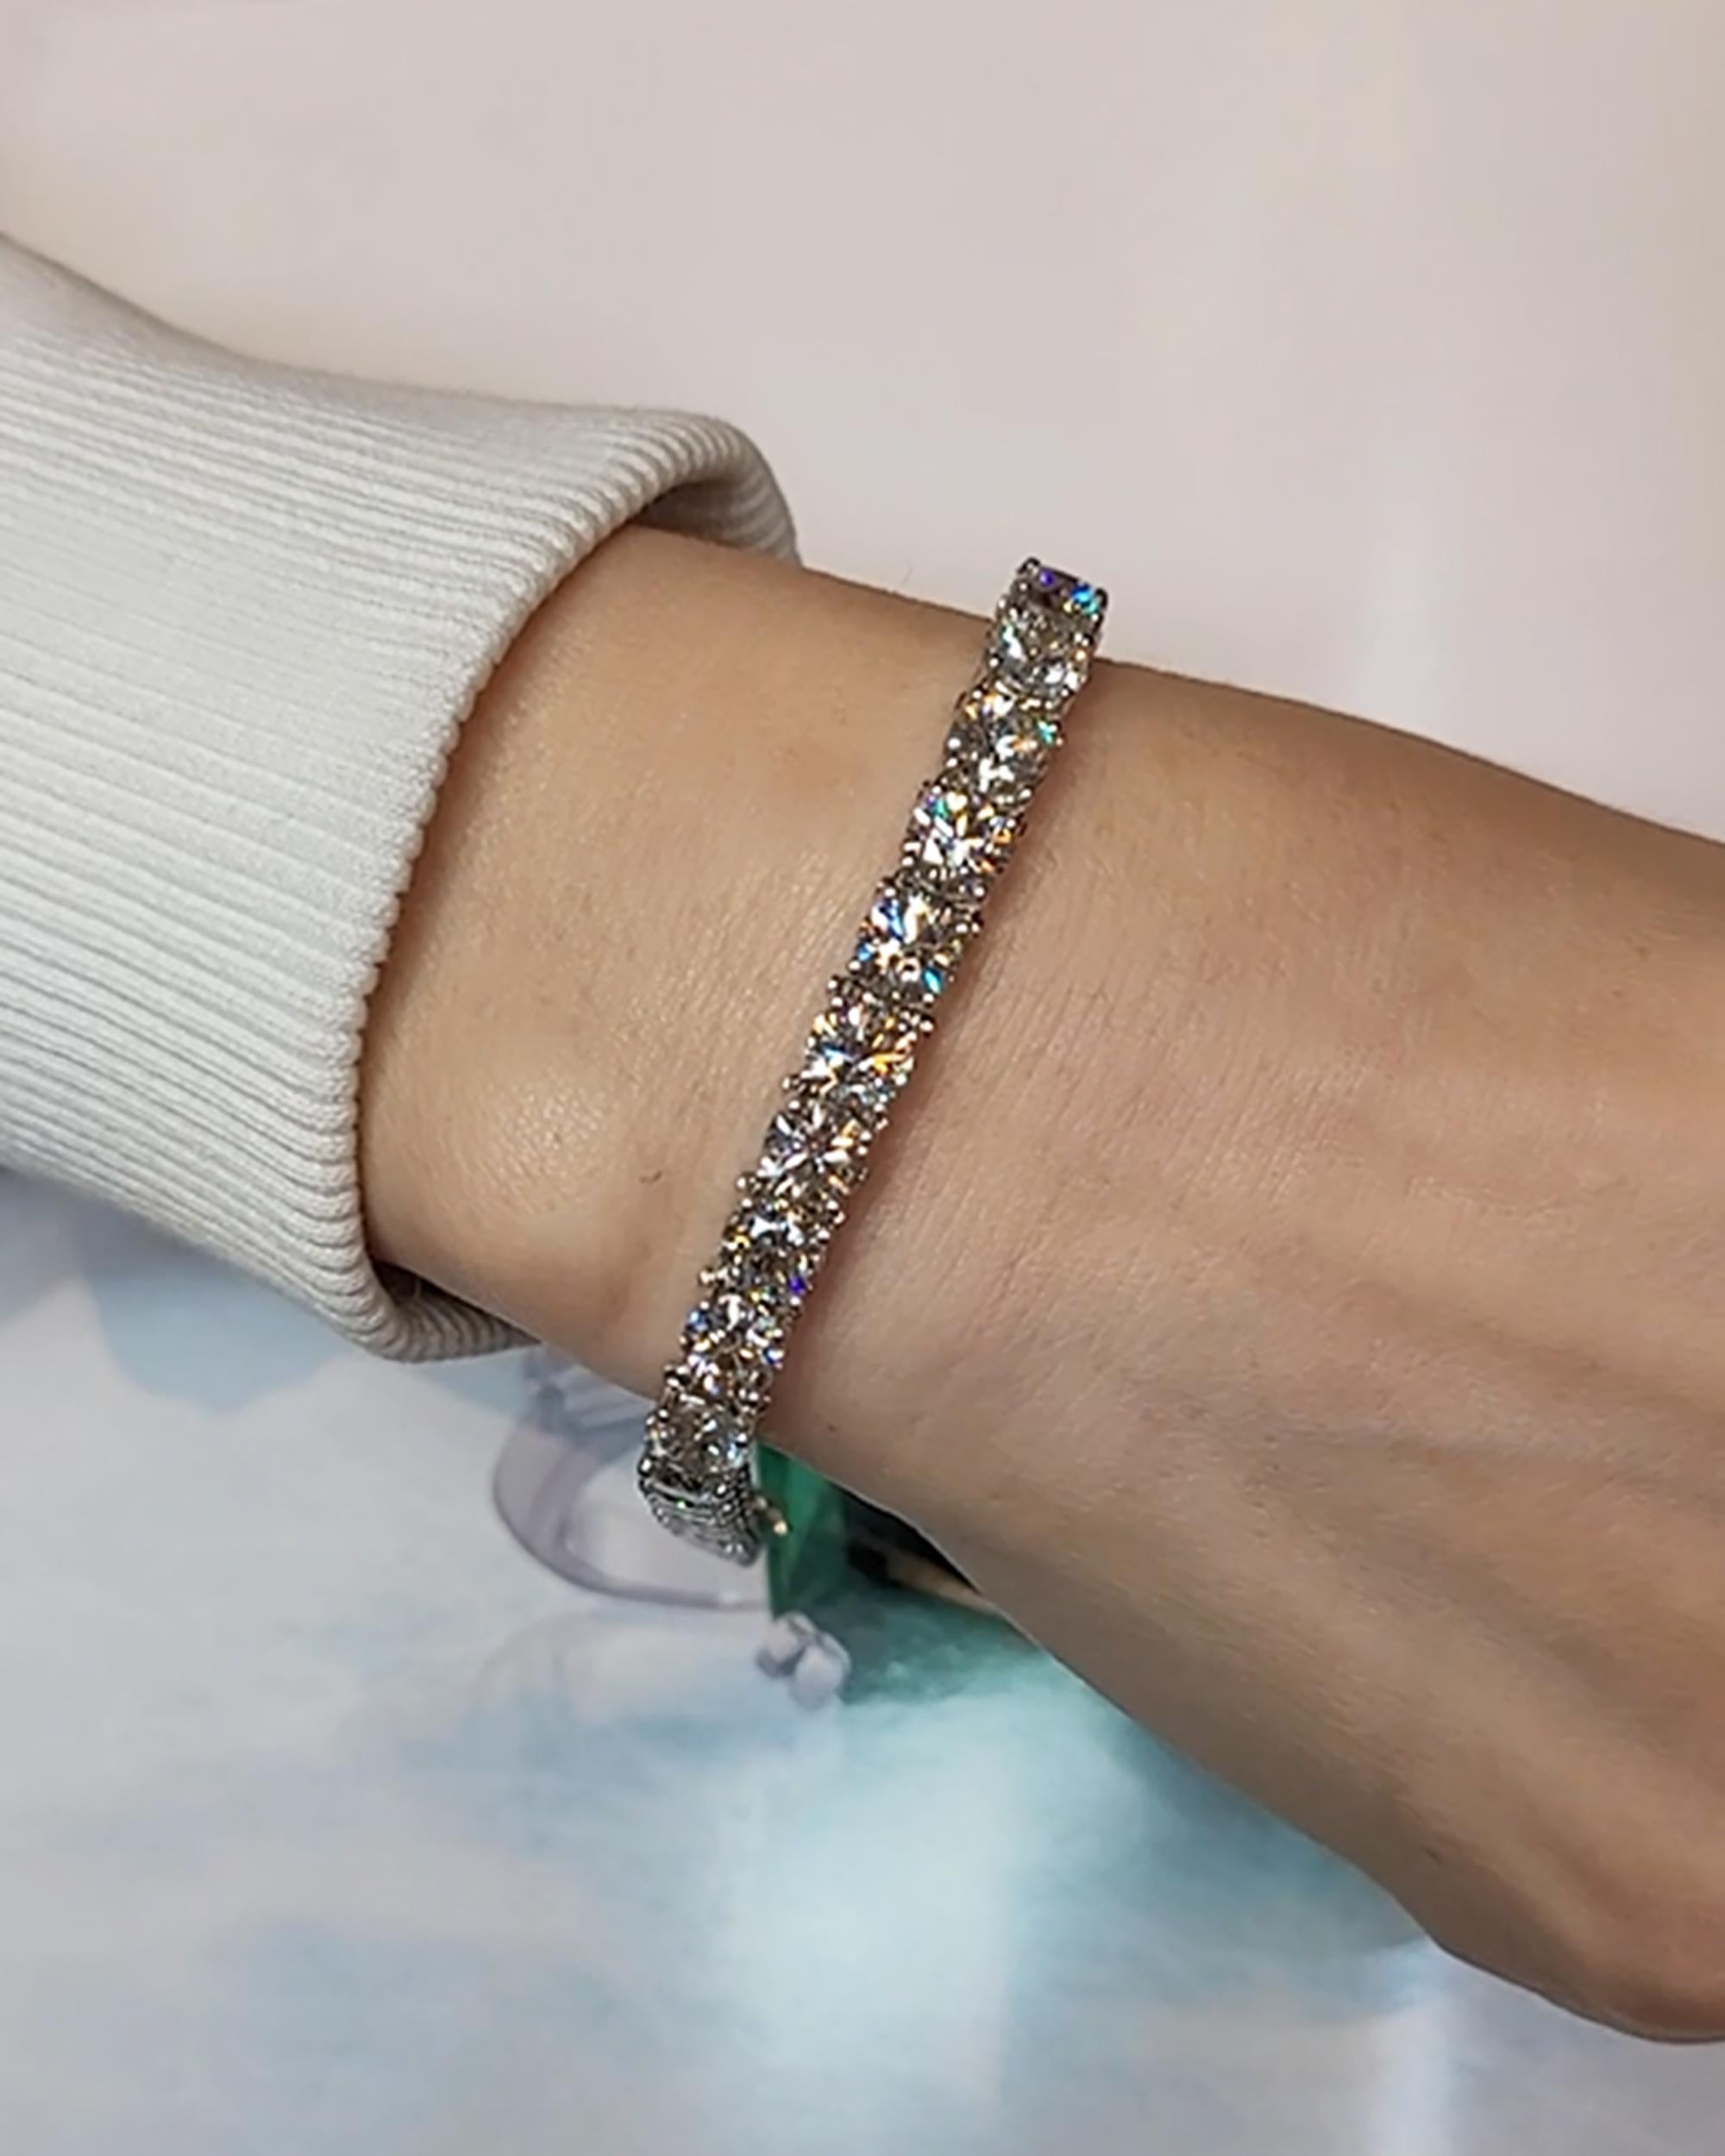 This stunning bracelet is adorned with 30 round diamonds, each boasting an individual weight of approximately 0.70 carats, resulting in a grand total of 21.05 carats. The diamonds exhibit a refined I-J color and VS-SI clarity, ensuring a brilliant